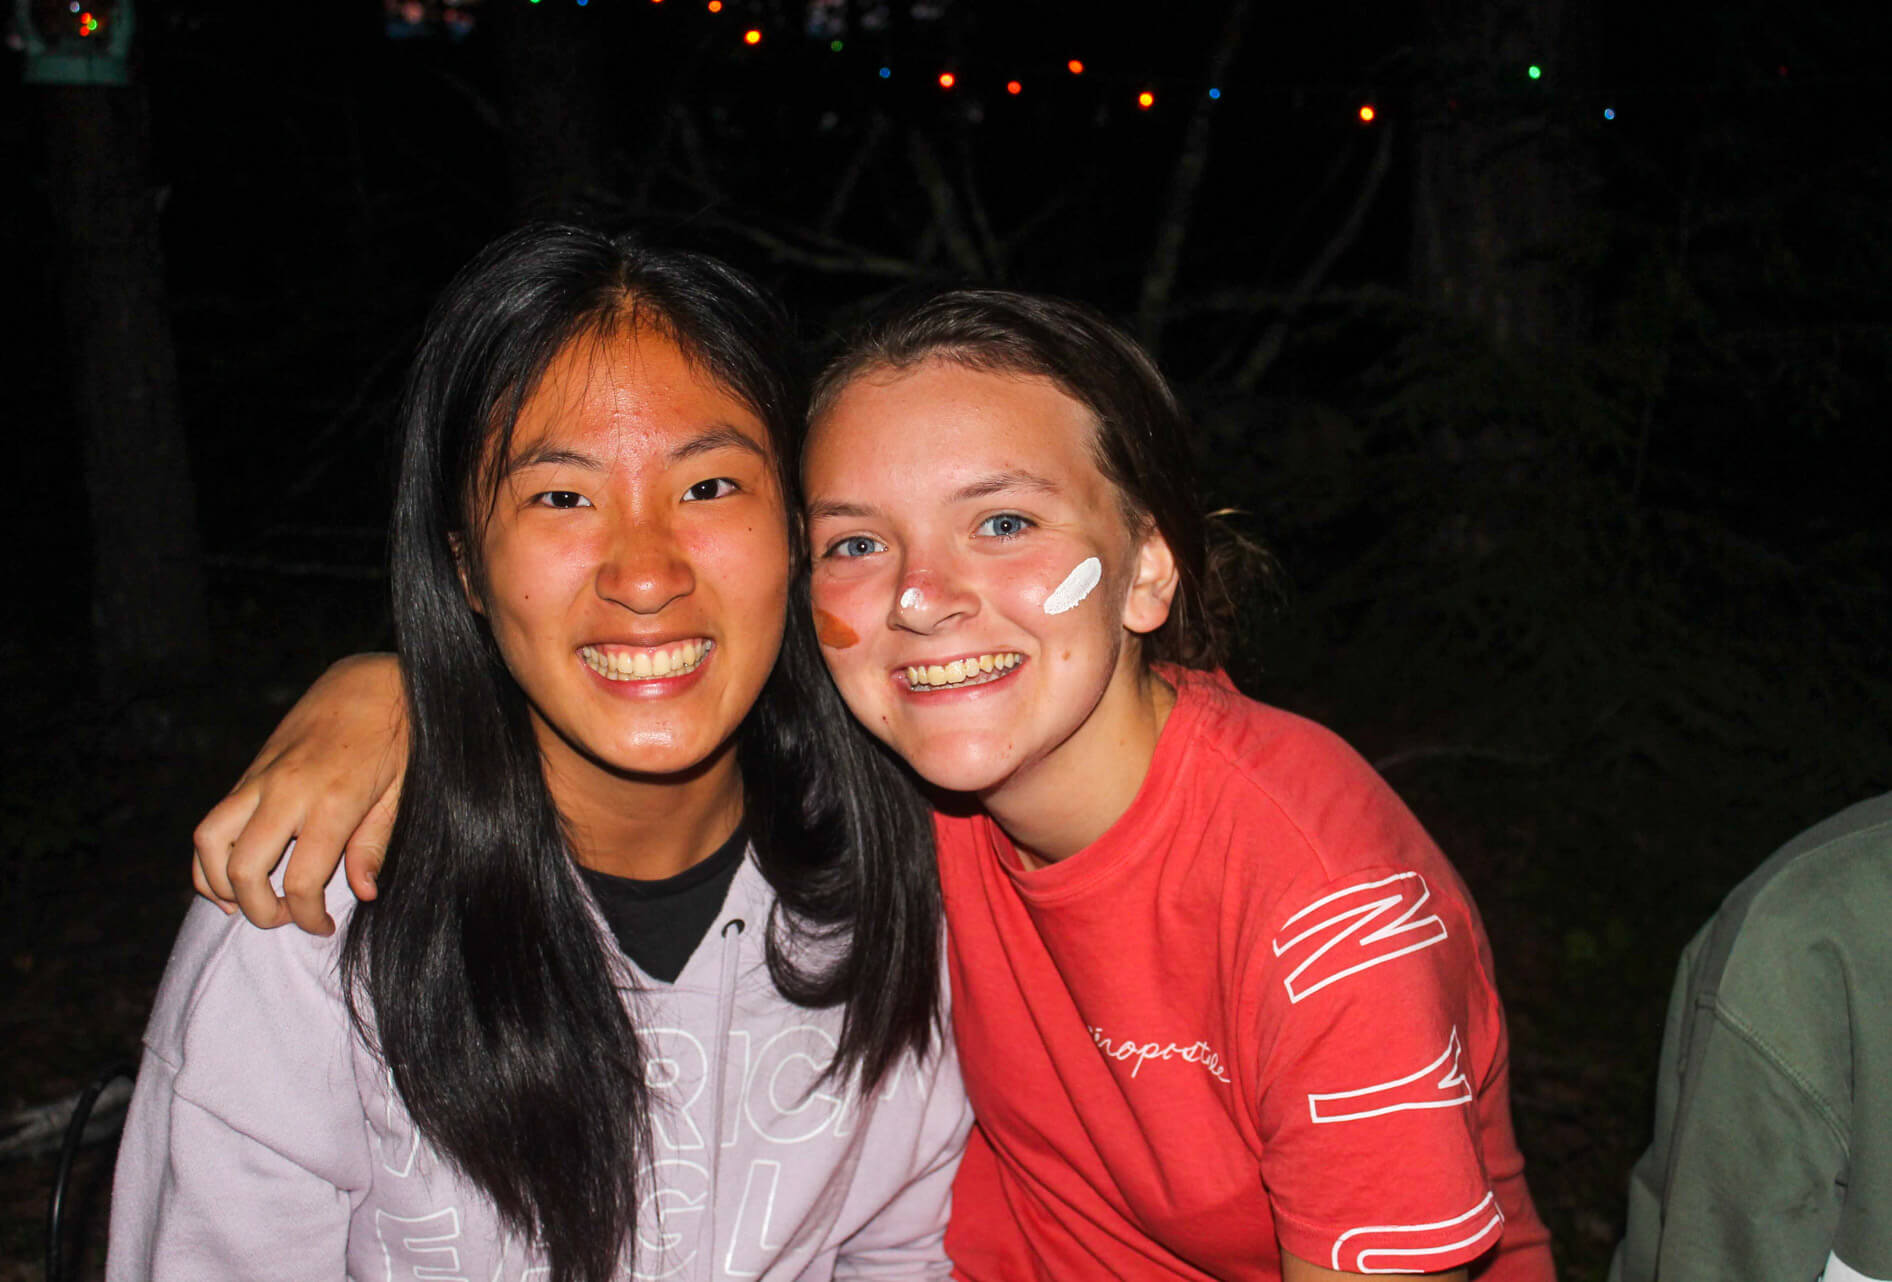 Two smiling campers pose for photo at night